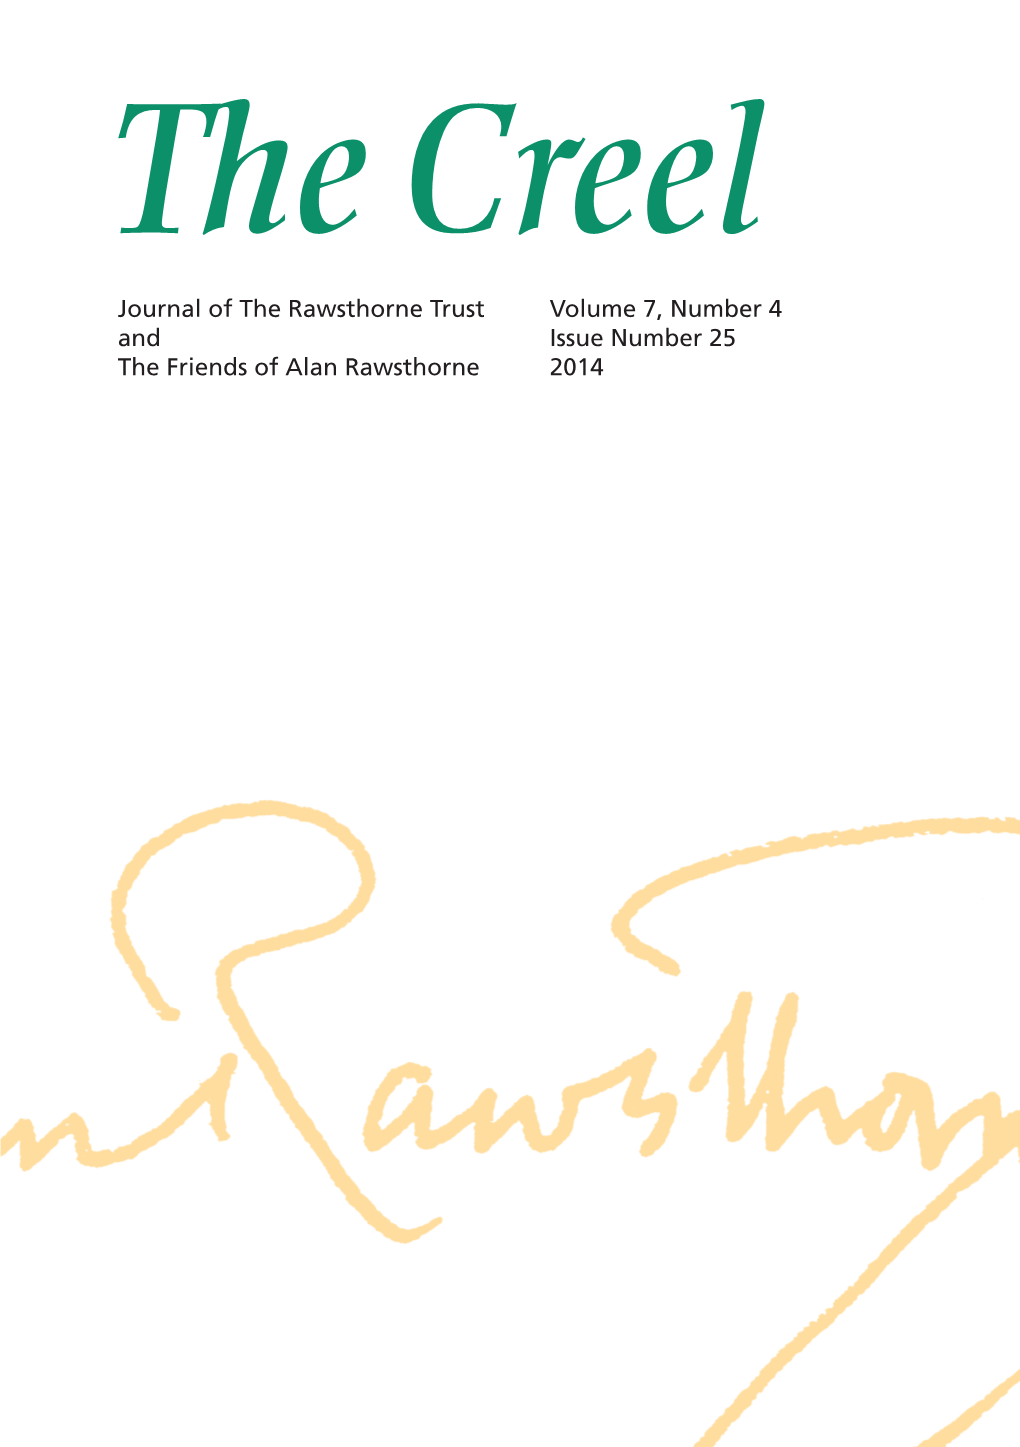 Journal of the Rawsthorne Trust and the Friends of Alan Rawsthorne